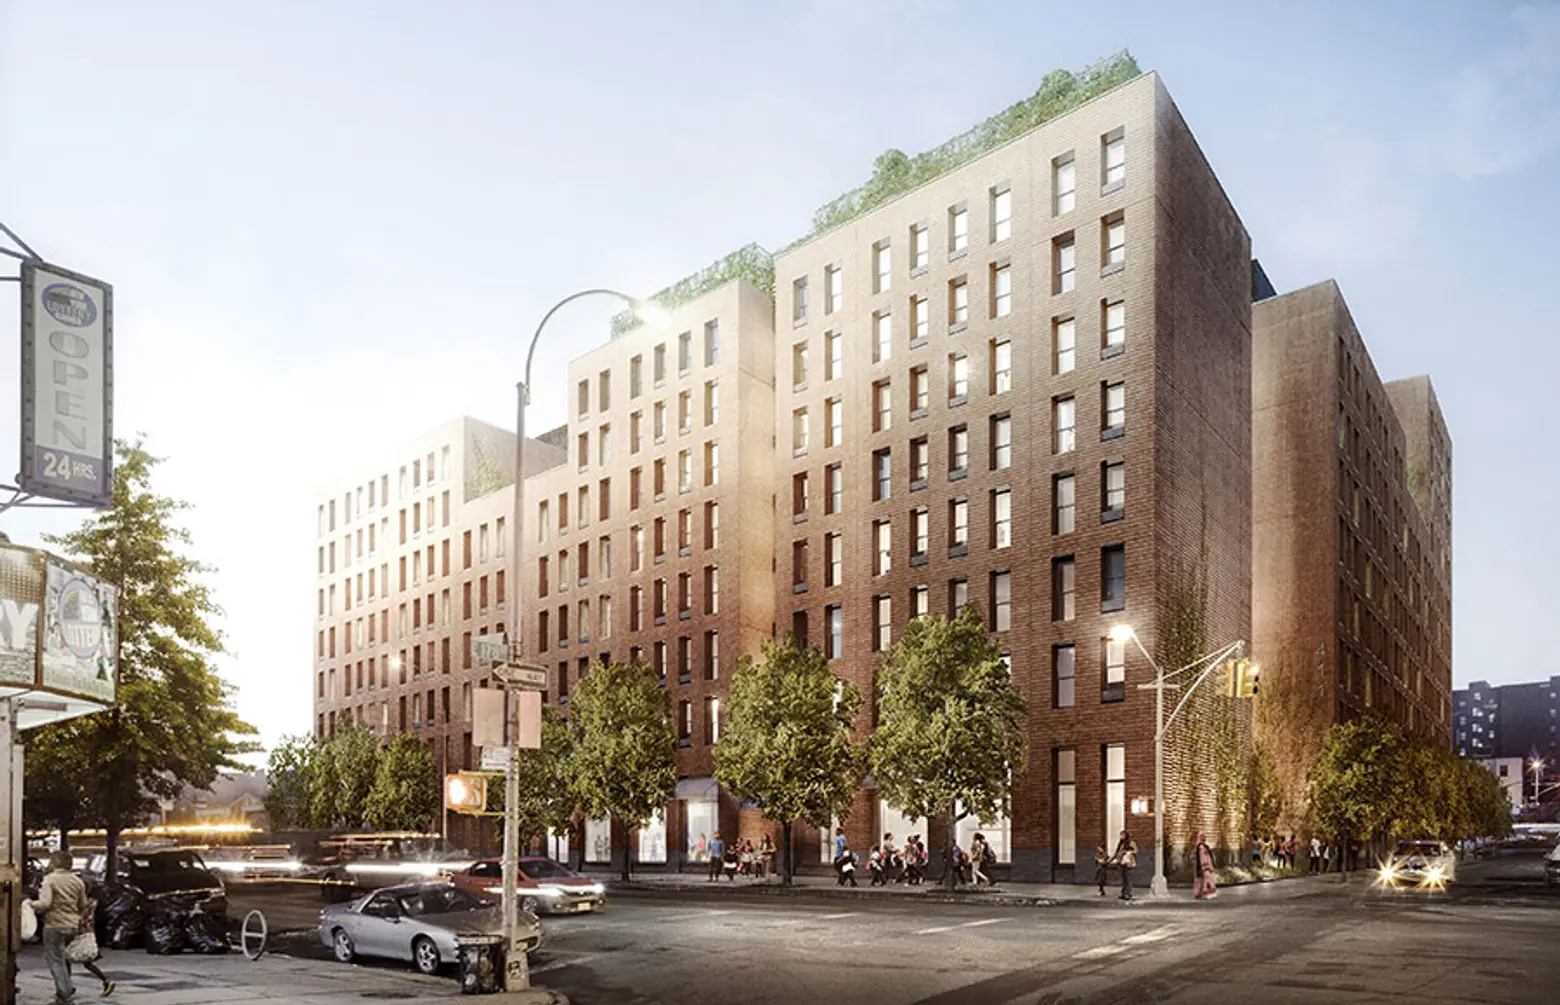 First Look at COOKFOX’s Affordable Housing Development in East Tremont